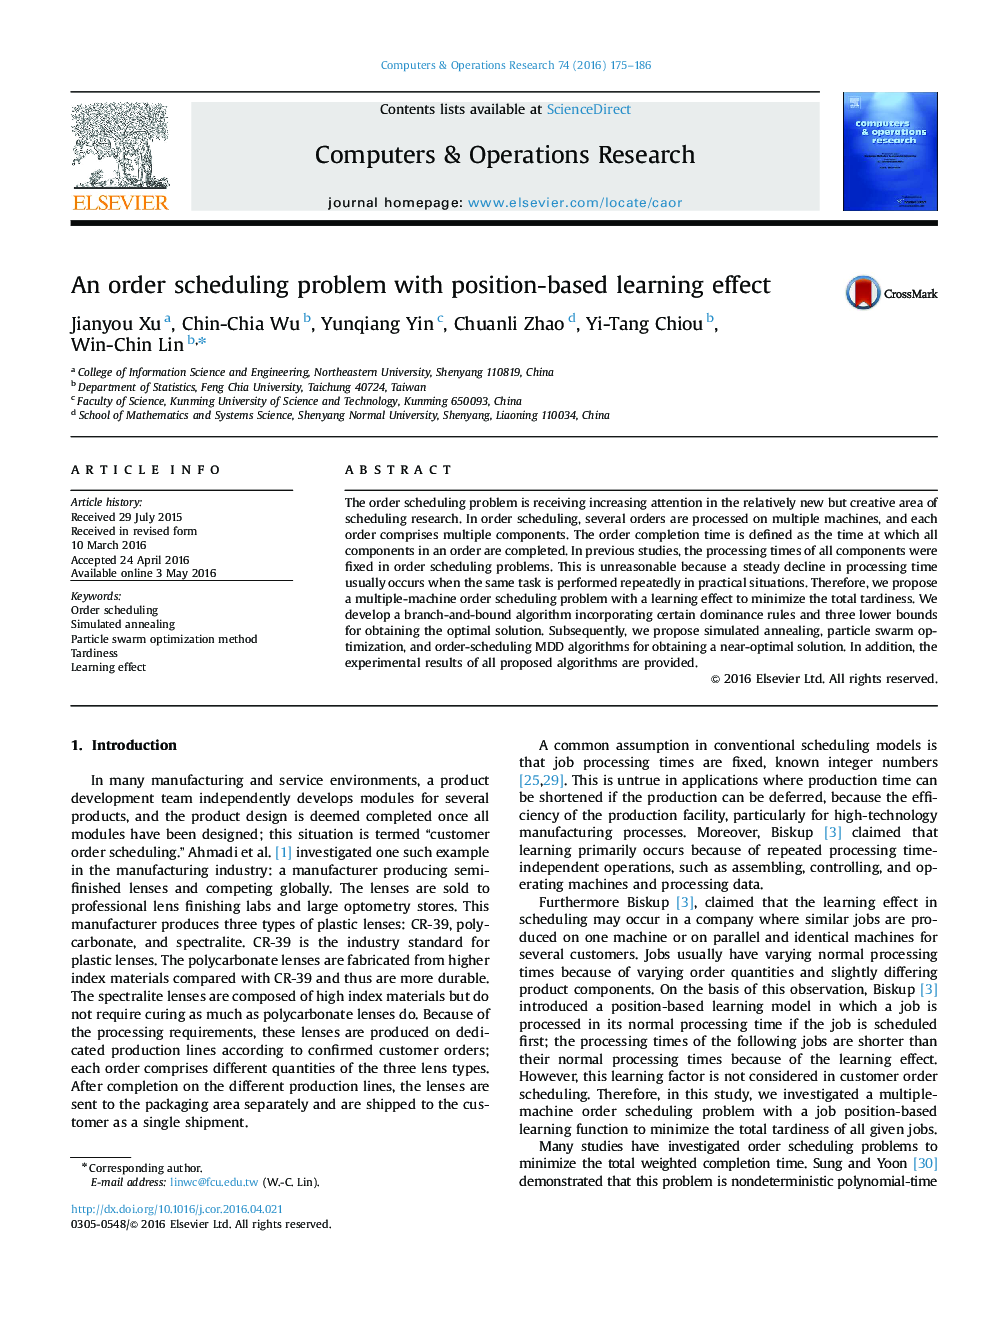 An order scheduling problem with position-based learning effect